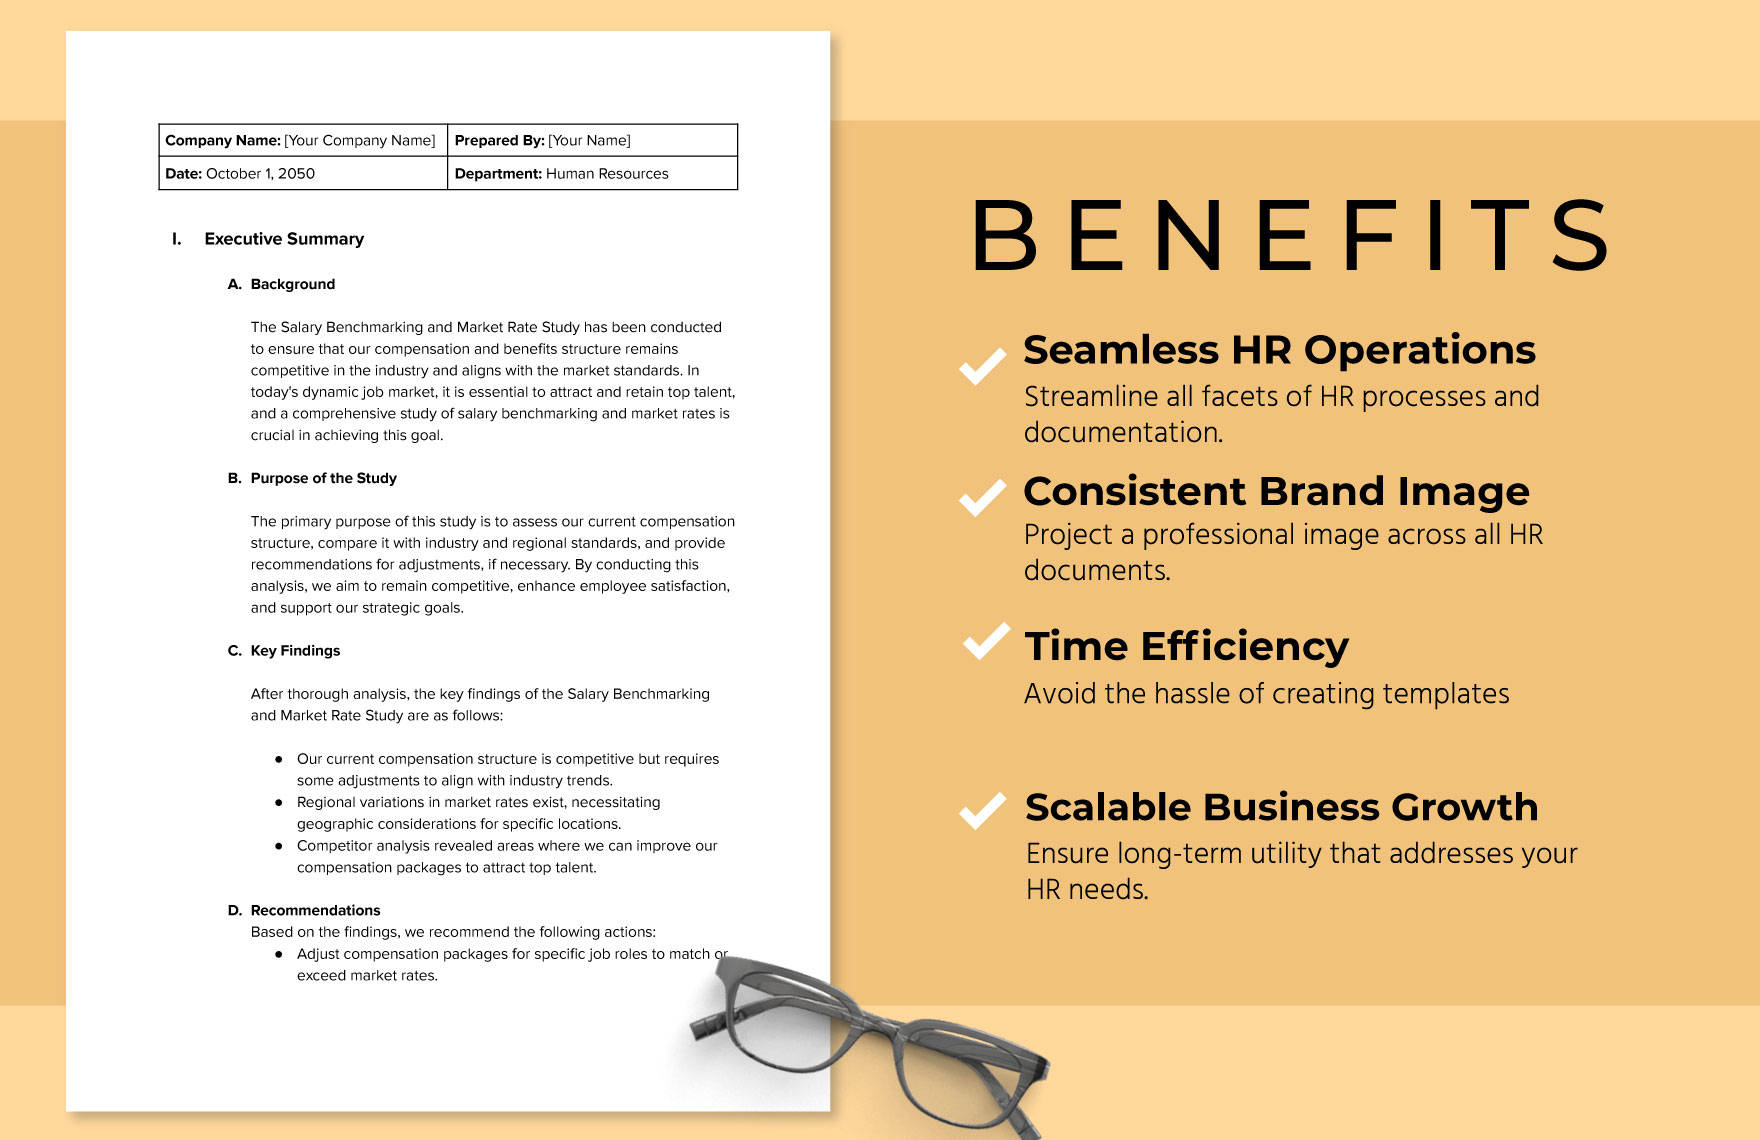 Salary Benchmarking and Market Rate Study HR Template